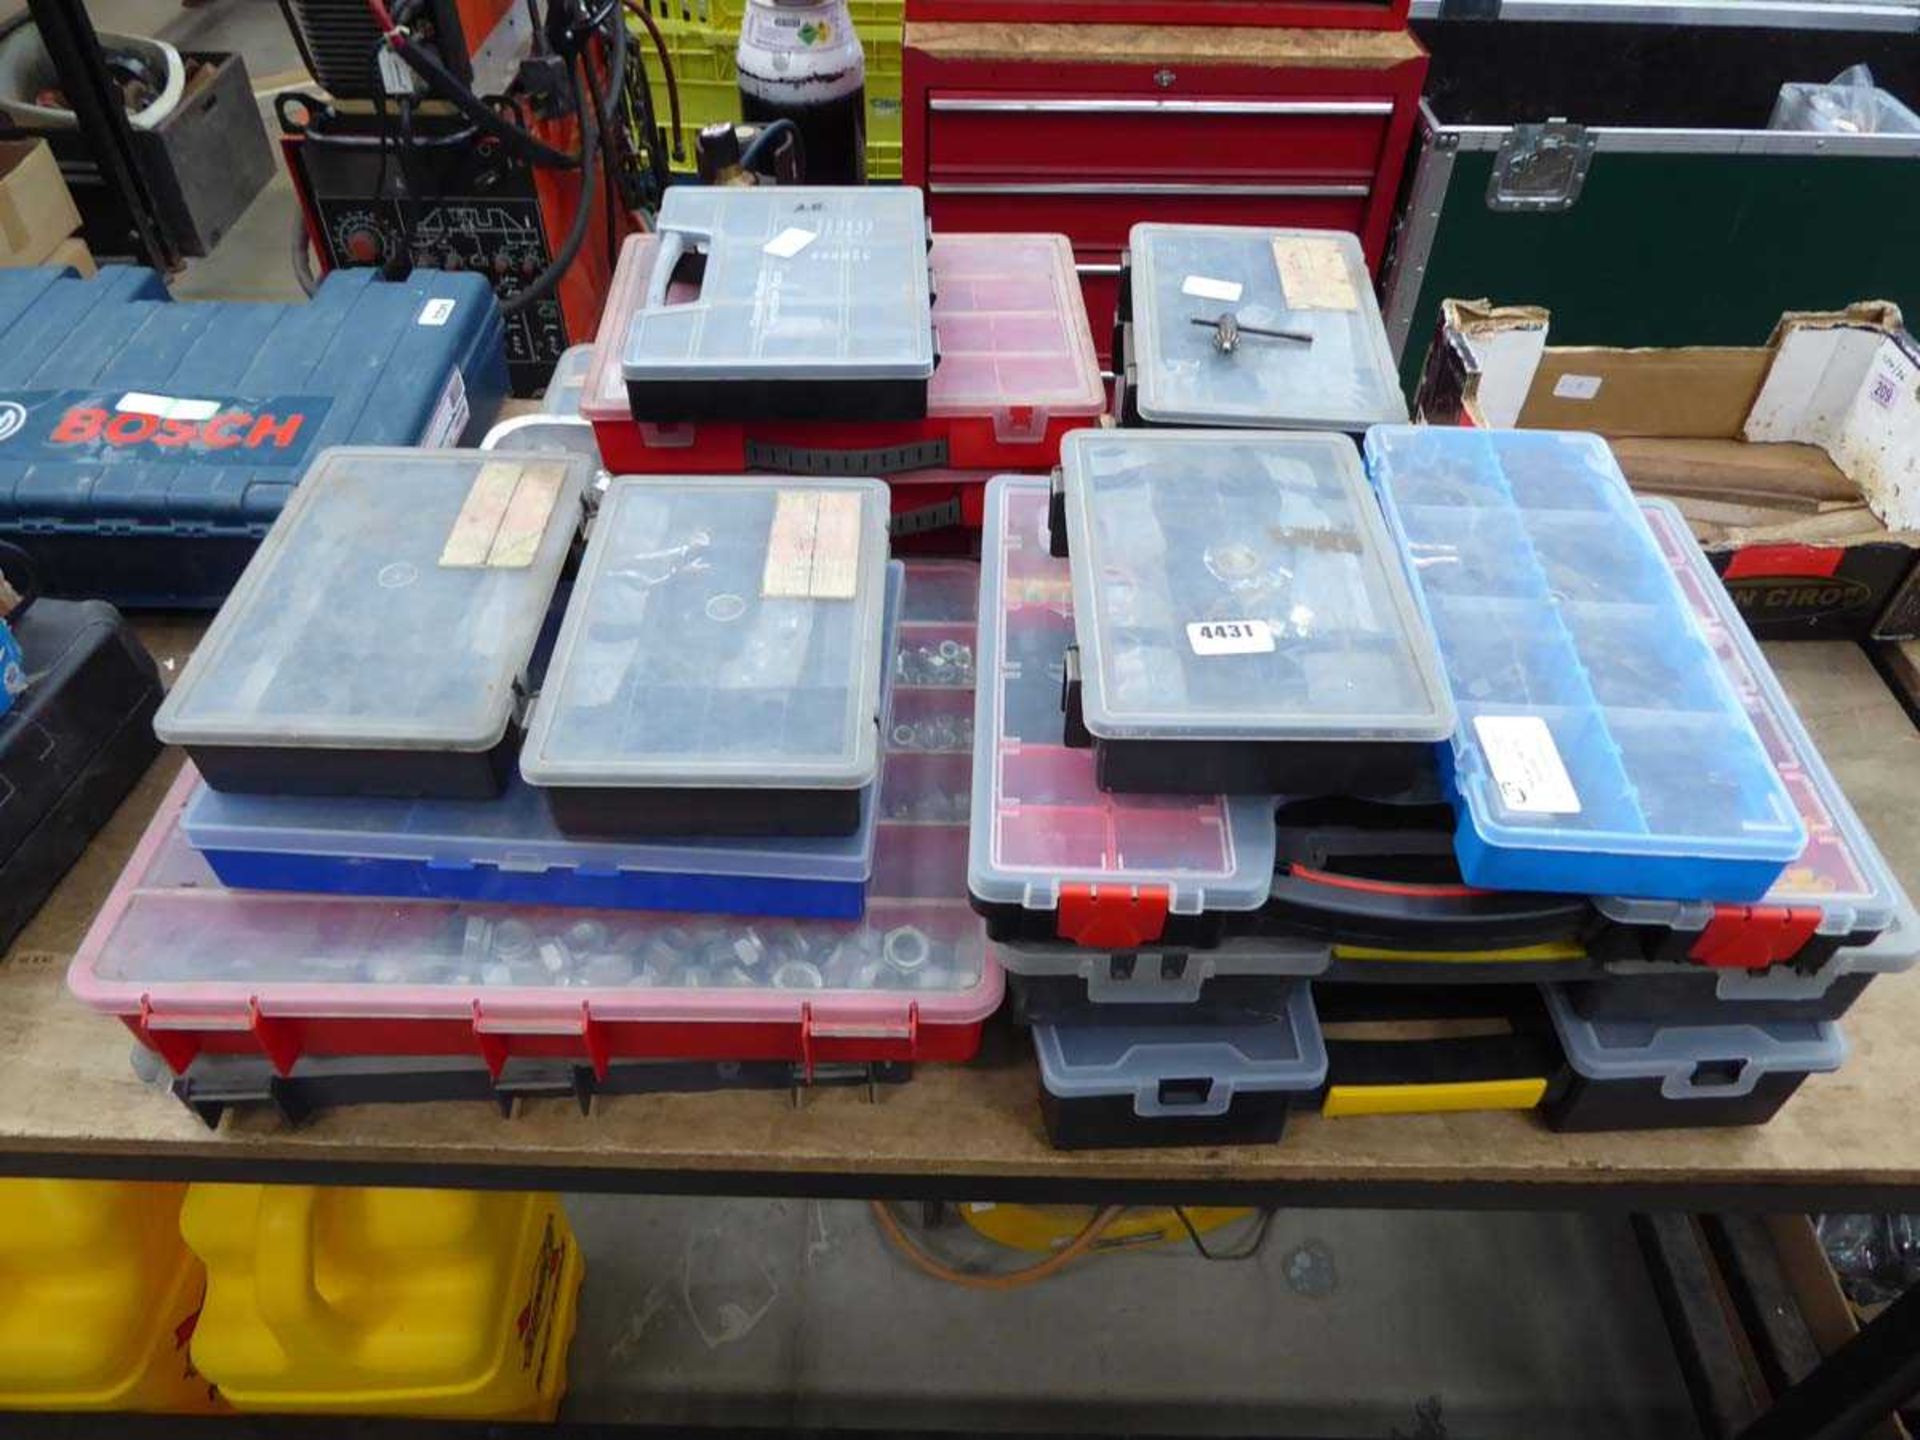 Large quantity of plastic fixings boxes inc. nuts, bolts, screws, washers, electrical connectors